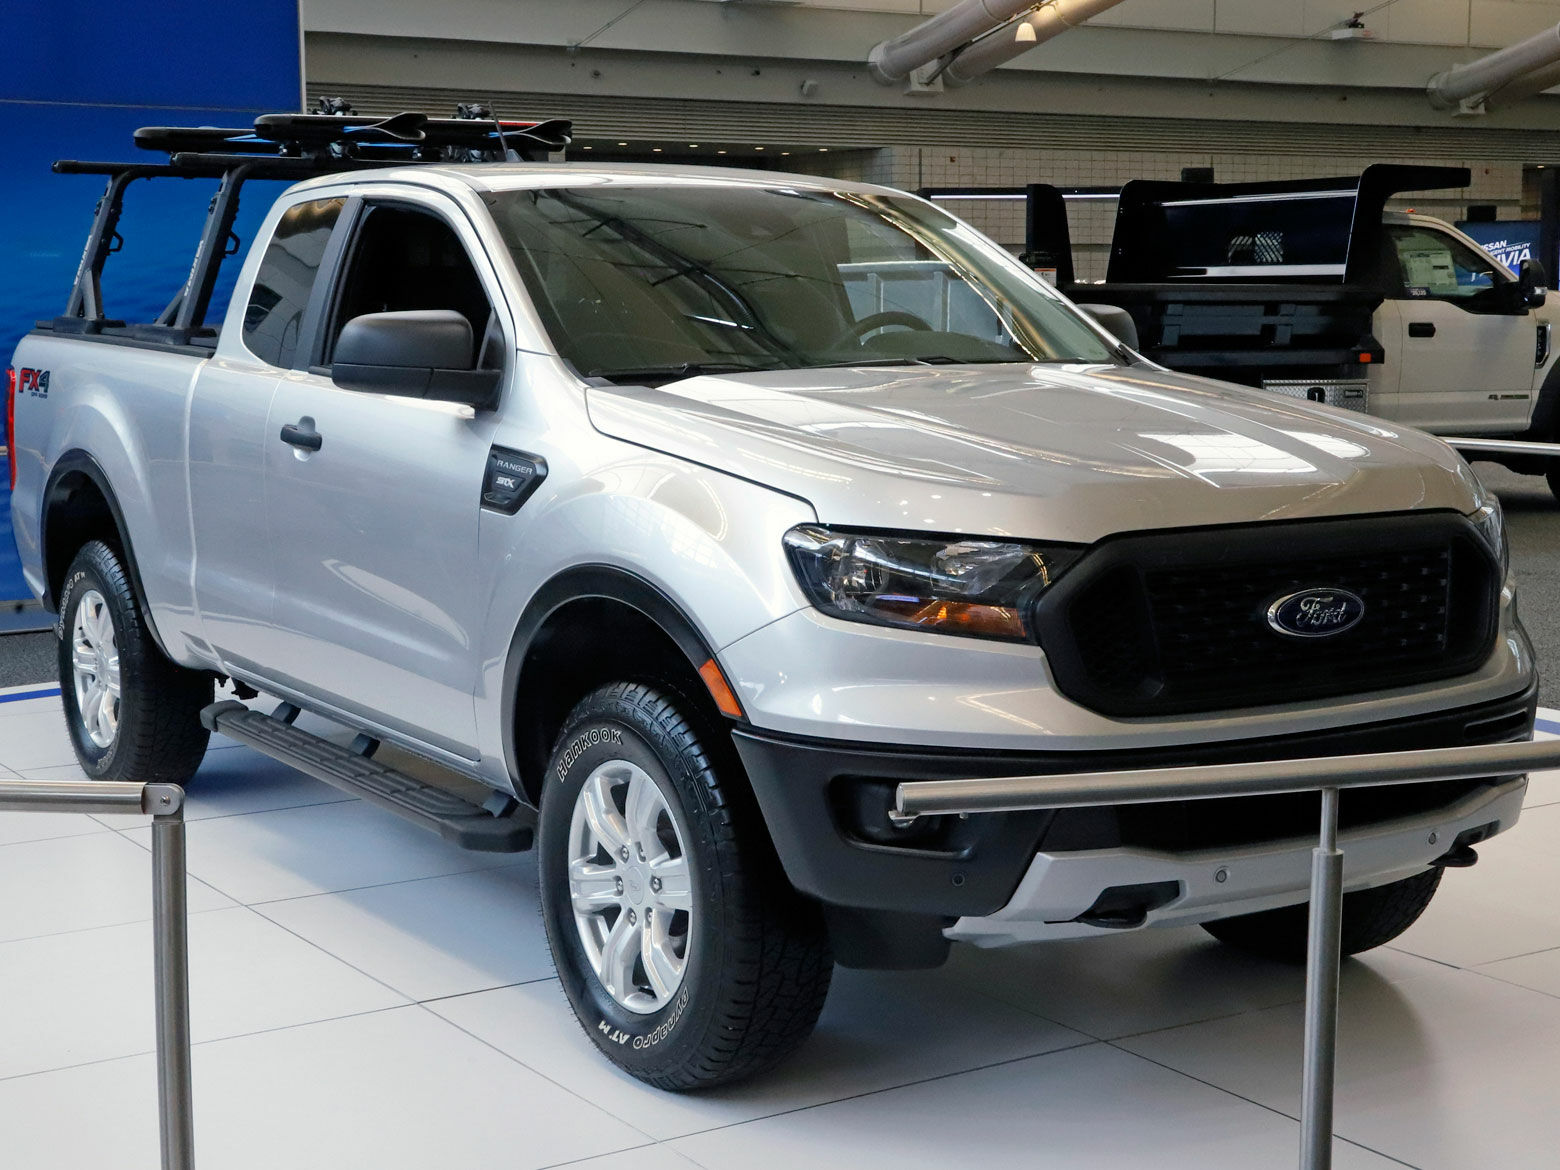 <h3><strong>2020 Ford Ranger</strong></h3>
<p><strong>Lease Deal: As low as $239 per month for 36 months with $3,539 due at signing</strong></p>
<p>Shoppers looking for a pickup, but who don’t need the capacity of a full-size truck, have plenty of money-saving options this Fourth of July. In addition to their F-150 deals, Ford is also offering lease deals on the <a href="https://cars.usnews.com/cars-trucks/ford/ranger">2020 Ford Ranger</a>.</p>
<p>The terms of the lease offers vary greatly based on where you live and the model you choose. One of the best is the Ranger lease deal available in parts of the Southwest, with payments of just $239 per month on a Ranger XLT SuperCrew with rear-wheel drive.</p>
<p>In our <a href="https://cars.usnews.com/cars-trucks/rankings/compact-pickup-trucks">ranking of compact pickups</a>, the Ranger earns a spot near the top of the list. It comes standard with a 270-horsepower turbo-four that allows properly equipped trucks to tow as much as 7,500 pounds. Rear-wheel drive comes standard, while four-wheel drive is available. Base models come standard with automatic emergency braking, an onboard Wi-Fi hot spot, and Ford&#8217;s MyKey teen driver system. Upgrading one step to the Ranger XLT gets you the easy-to-use Ford SYNC 3 infotainment system.</p>
